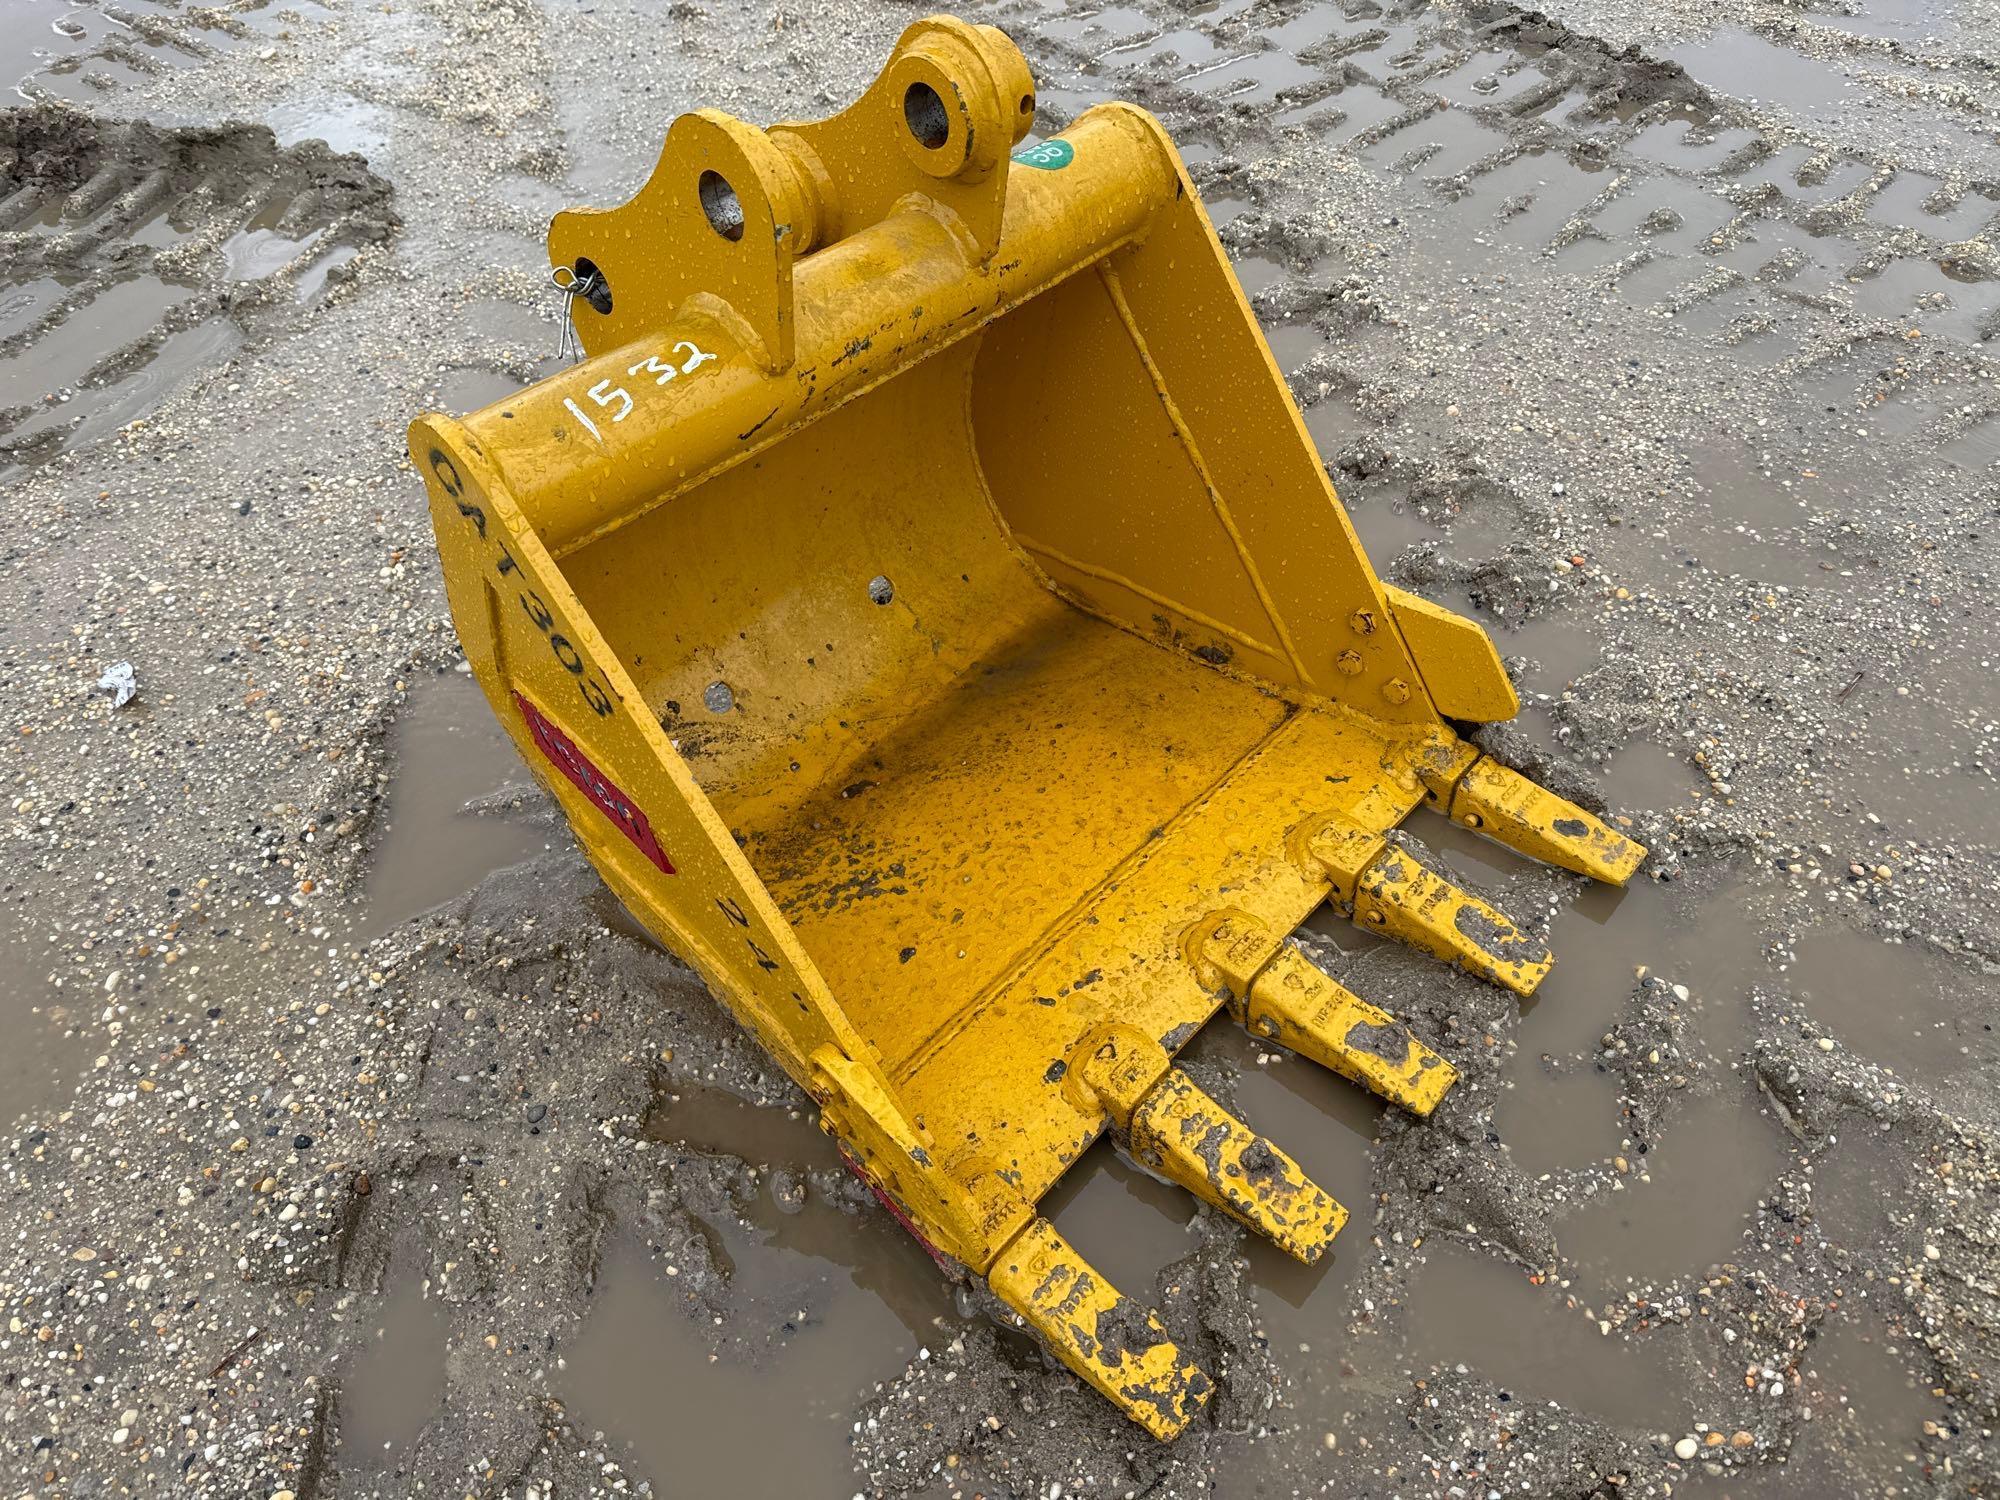 NEW TERAN 24IN. DIGGING BUCKET EXCAVATOR BUCKET FOR CAT 303 WITH SIDE CUTTERS, REINFORCEMENT PLATES